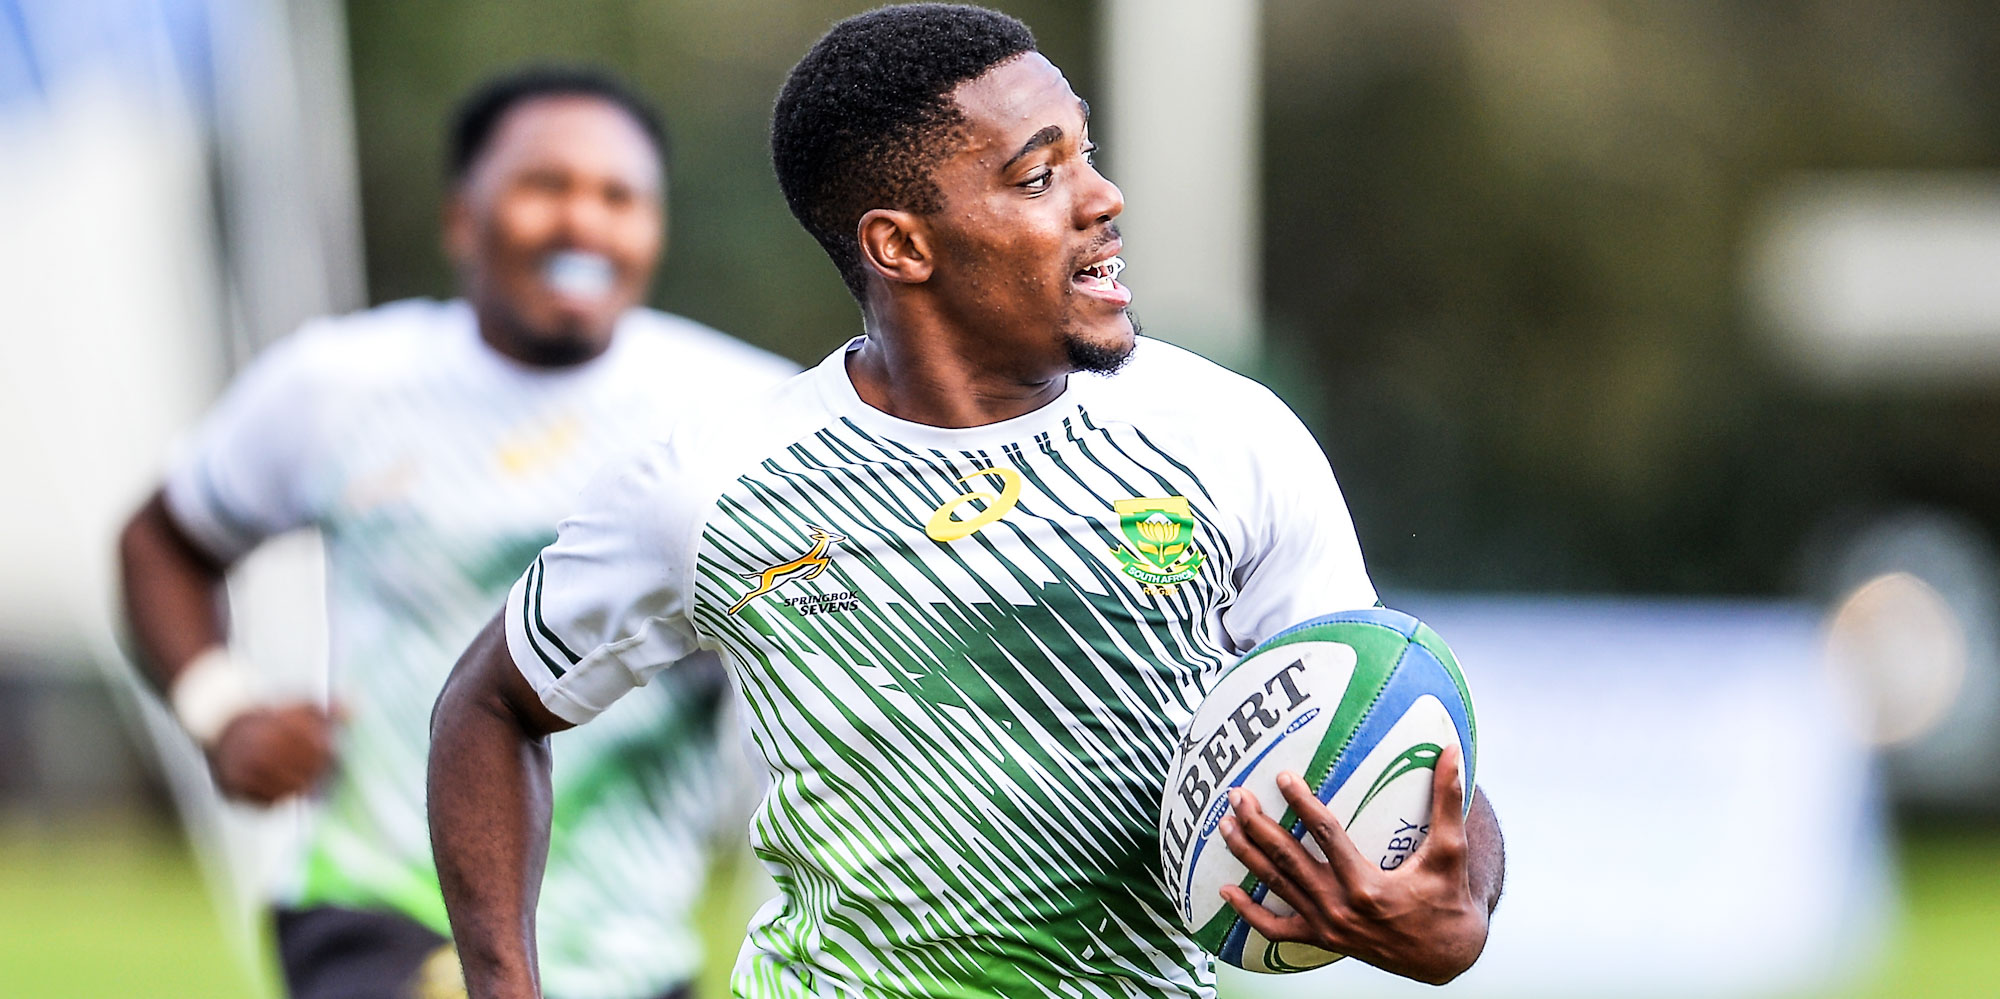 Latica Nela has been part of the SA Rugby Sevens Academy programme.